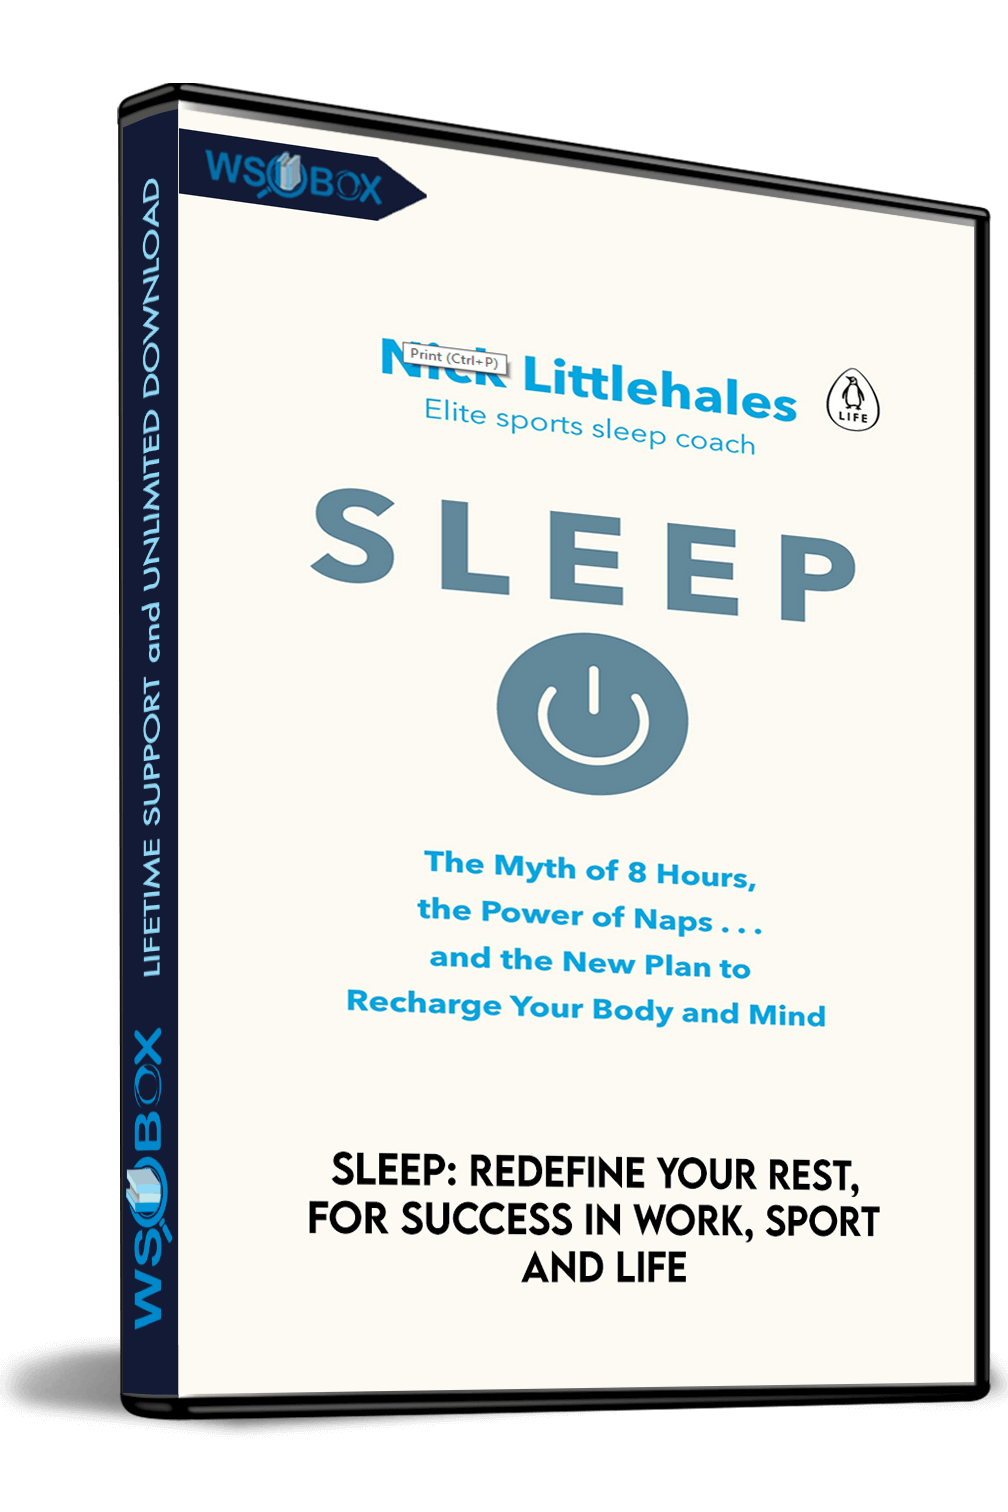 sleep-redefine-your-rest-for-success-in-work-sport-and-life